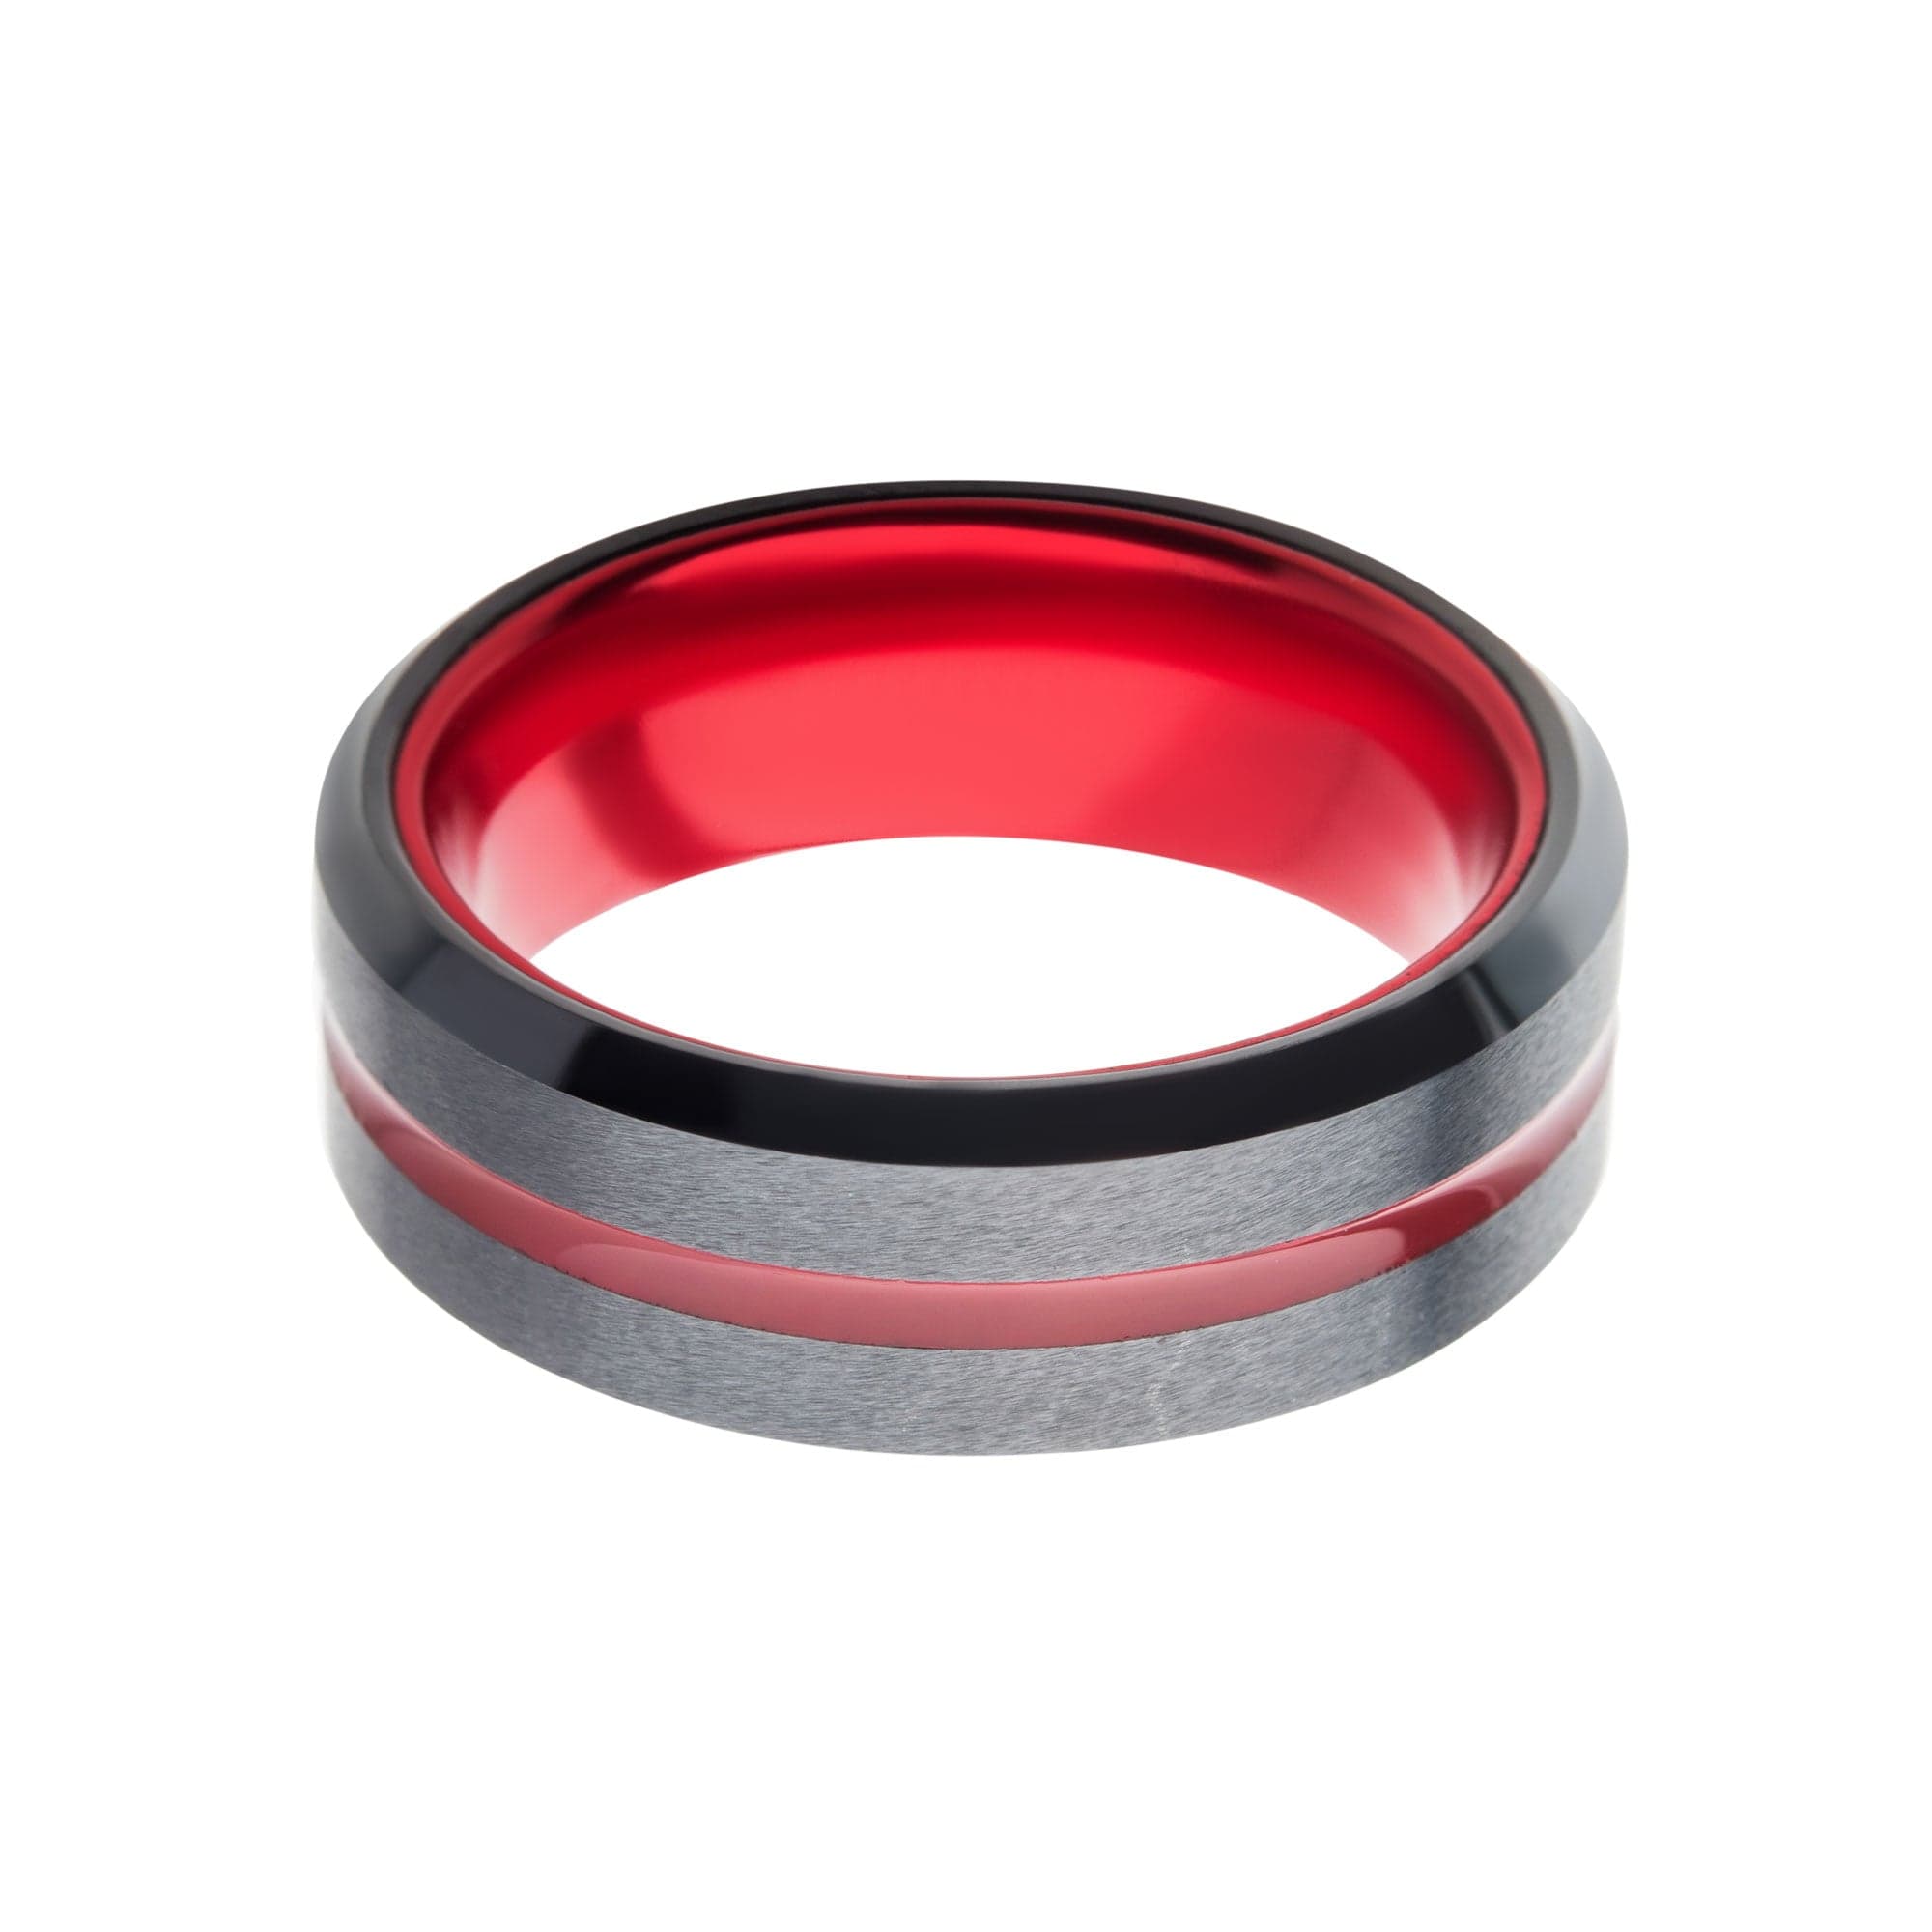 INOX JEWELRY Rings Black Stainless Steel with Inlaid Red Aluminum Beveled Wedding Band Ring